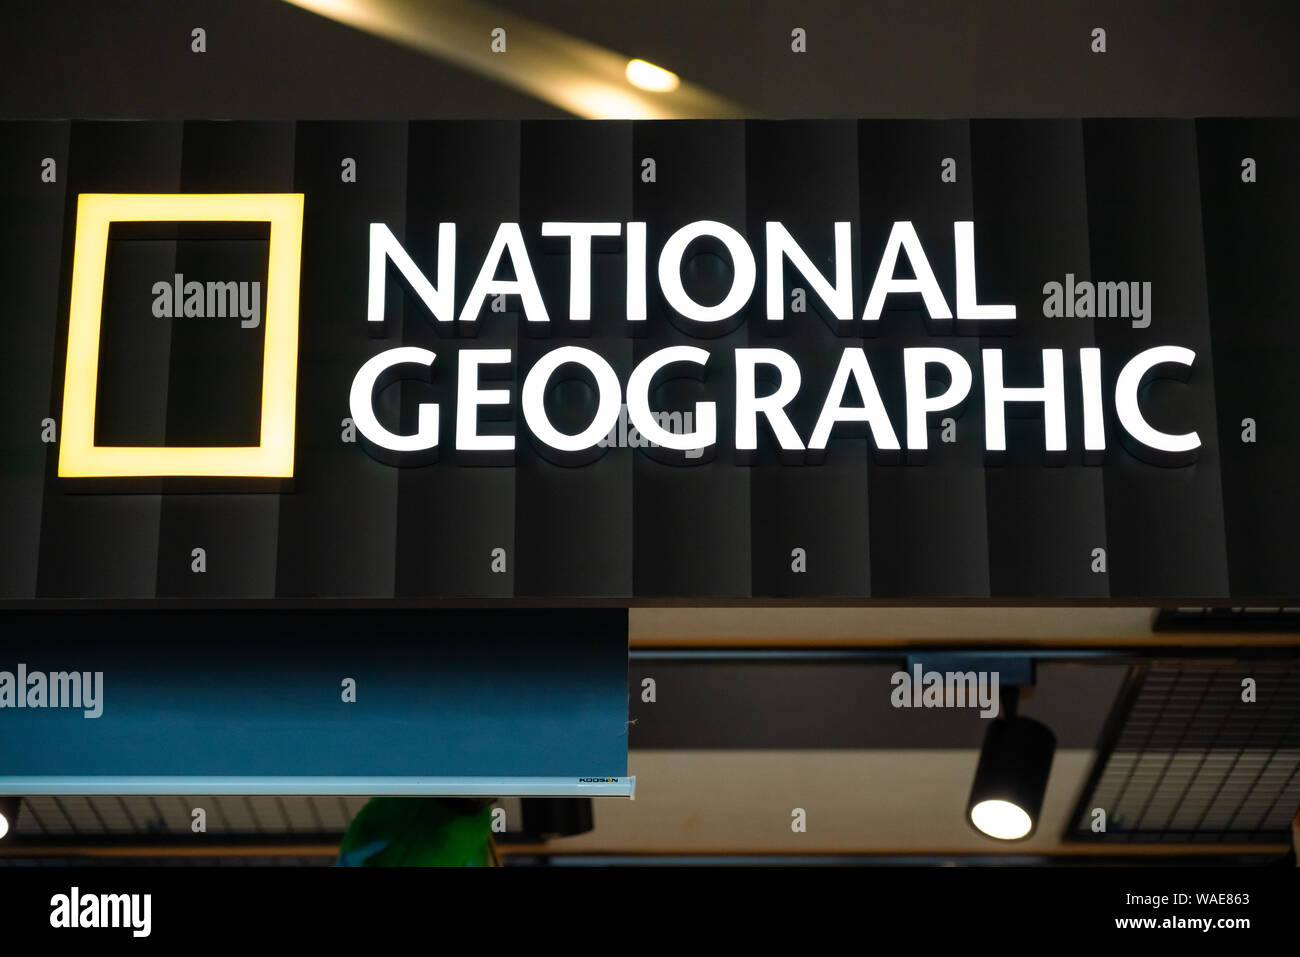 National Geographic logo, one of the largest non-profit scientific and educational organisations, seen in Shanghai Hongqiao International Airport. Stock Photo